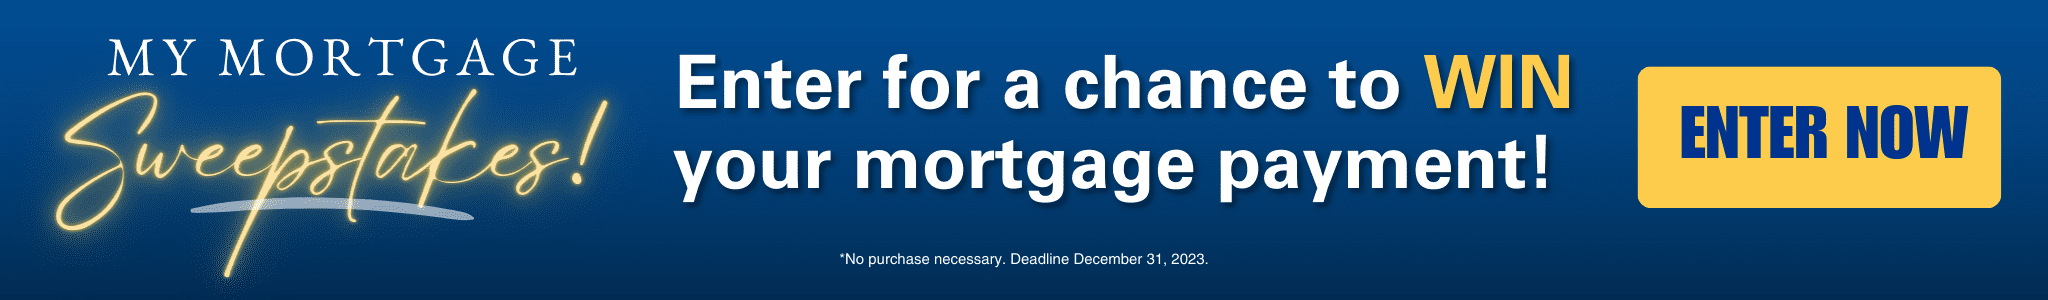 Win Your Mortgage Payment Sweepstakes